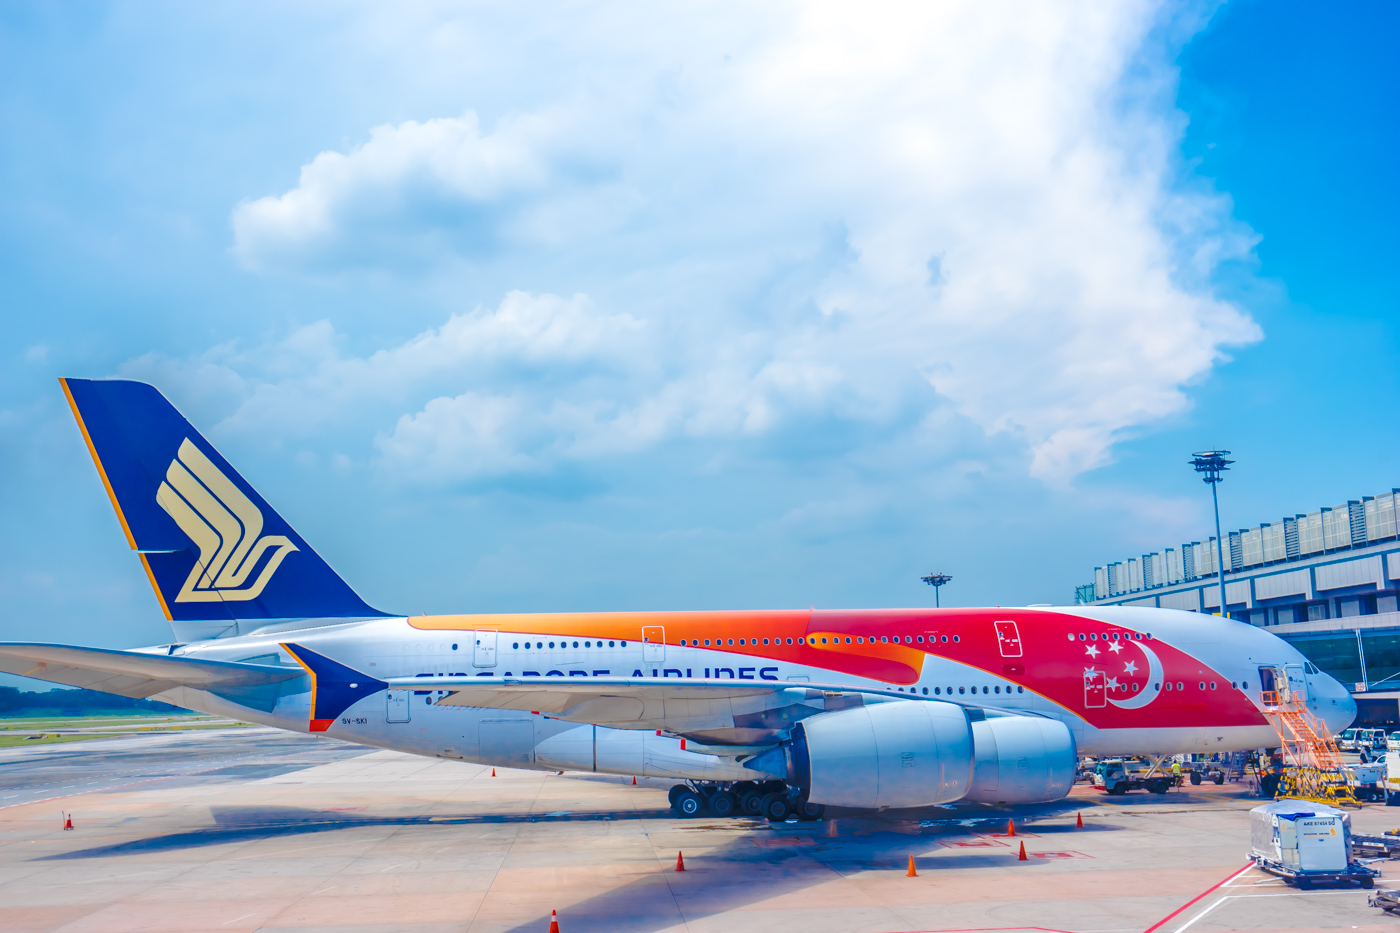 [:ja]やはり快適！シンガポール航空のビジネスクラスで3年半振りにシンガポールへ[:en]Flying to Singapore with Singapore Airlines' business class[:]